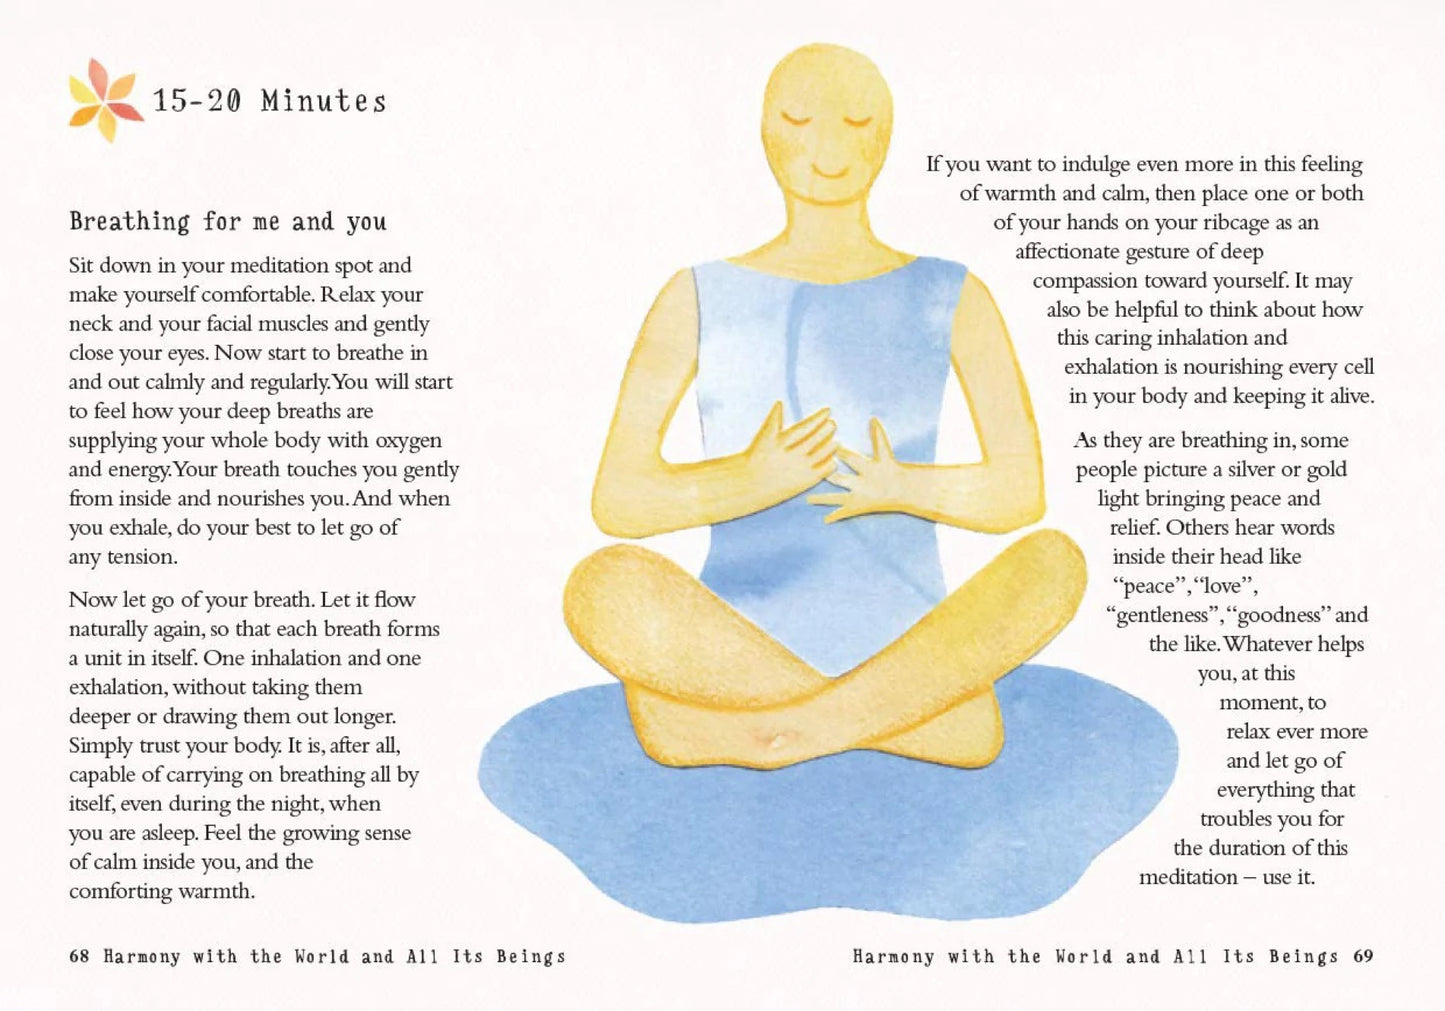 Internal excerpt from The Little Book of Meditation of a simple 20 minute exercise